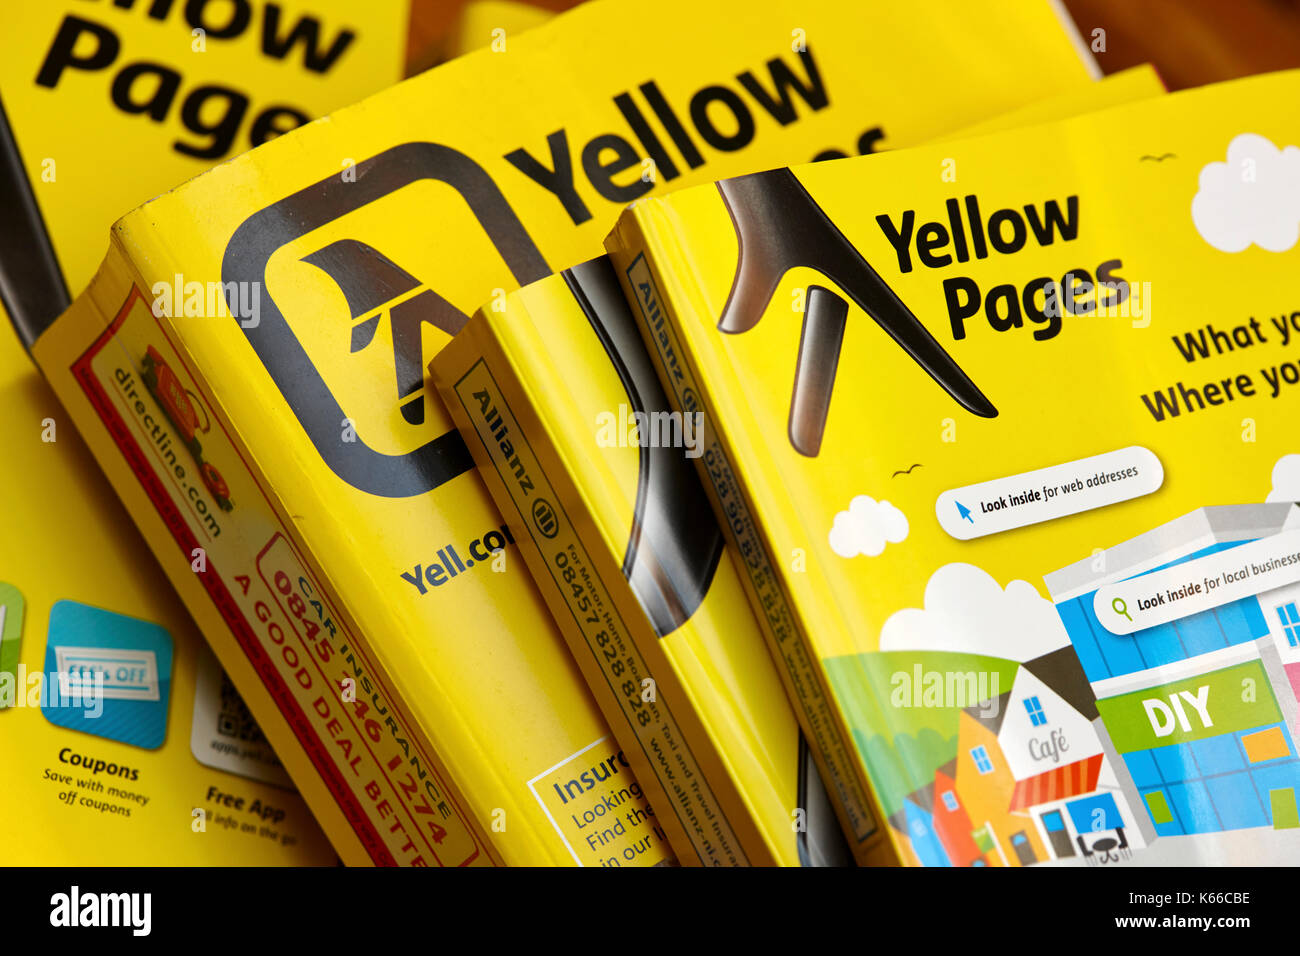 later smaller version of the yellow pages classified telephone directory paper edition uk Stock Photo